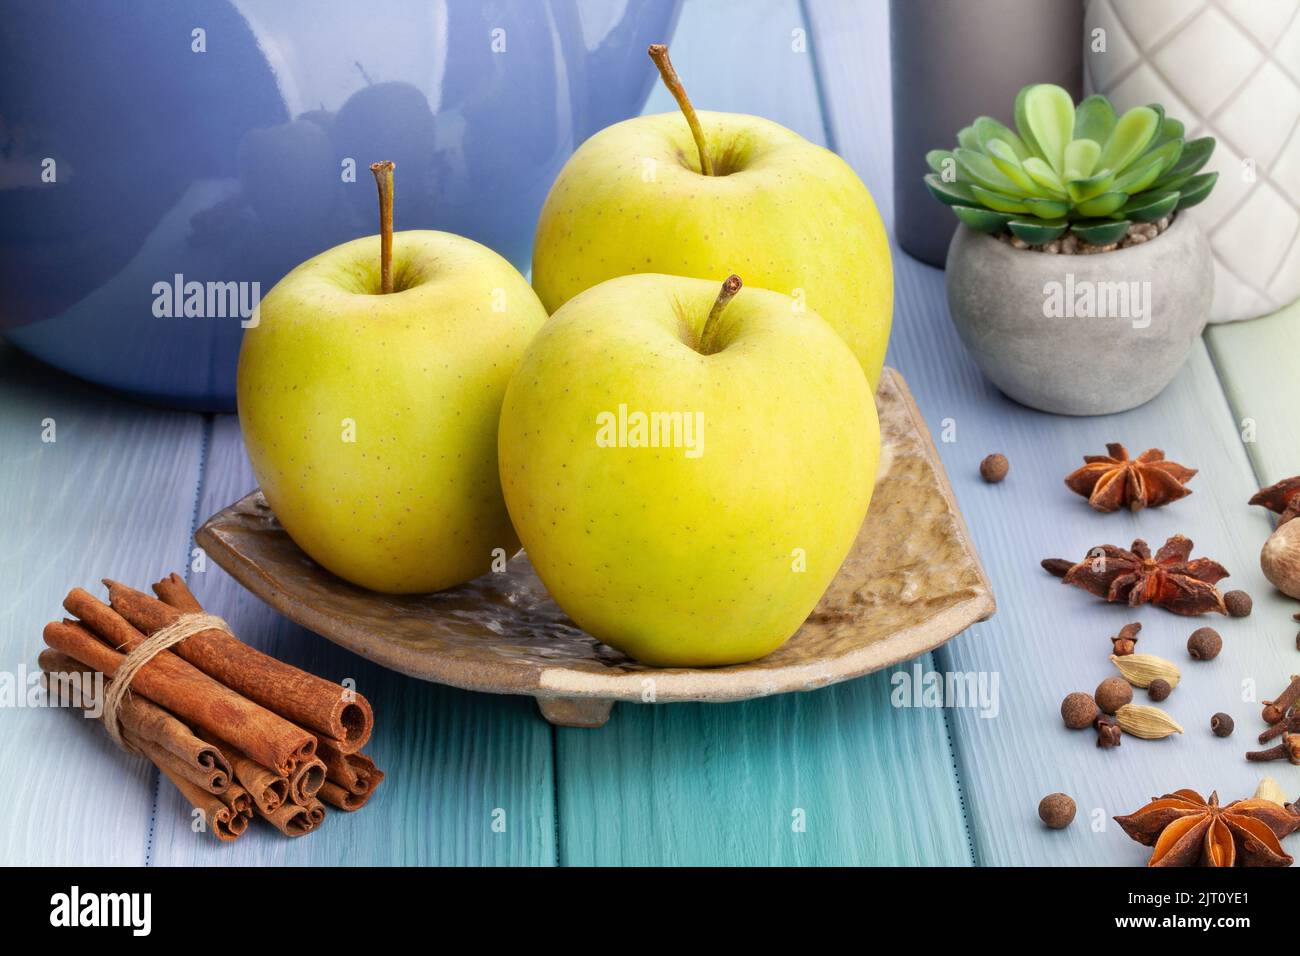 yellow apples on wood background Stock Photo